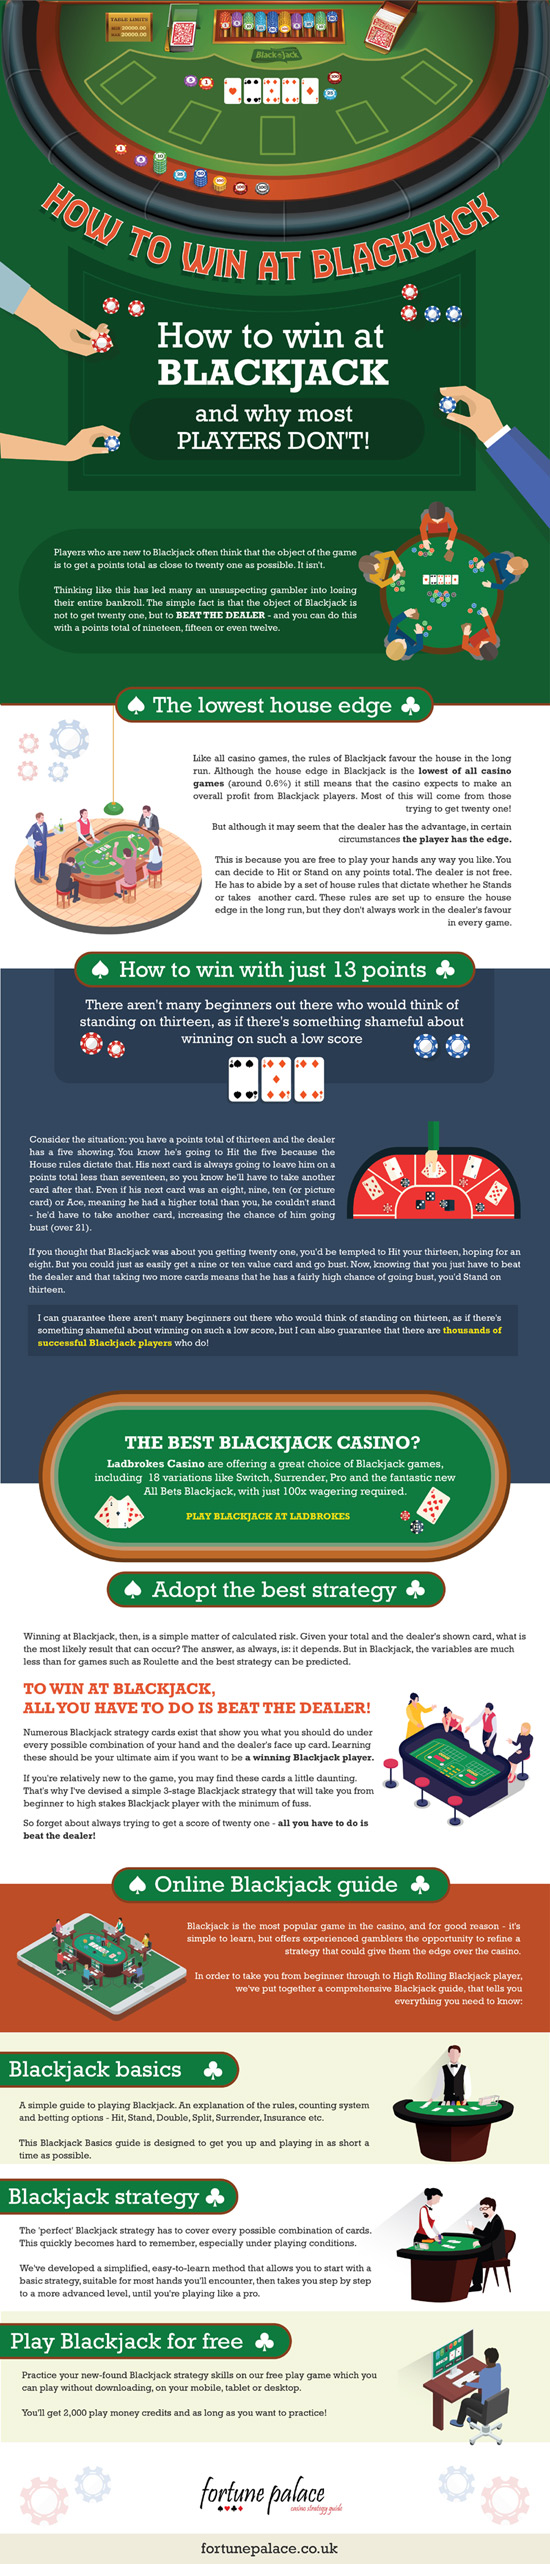 How to win at Blackjack